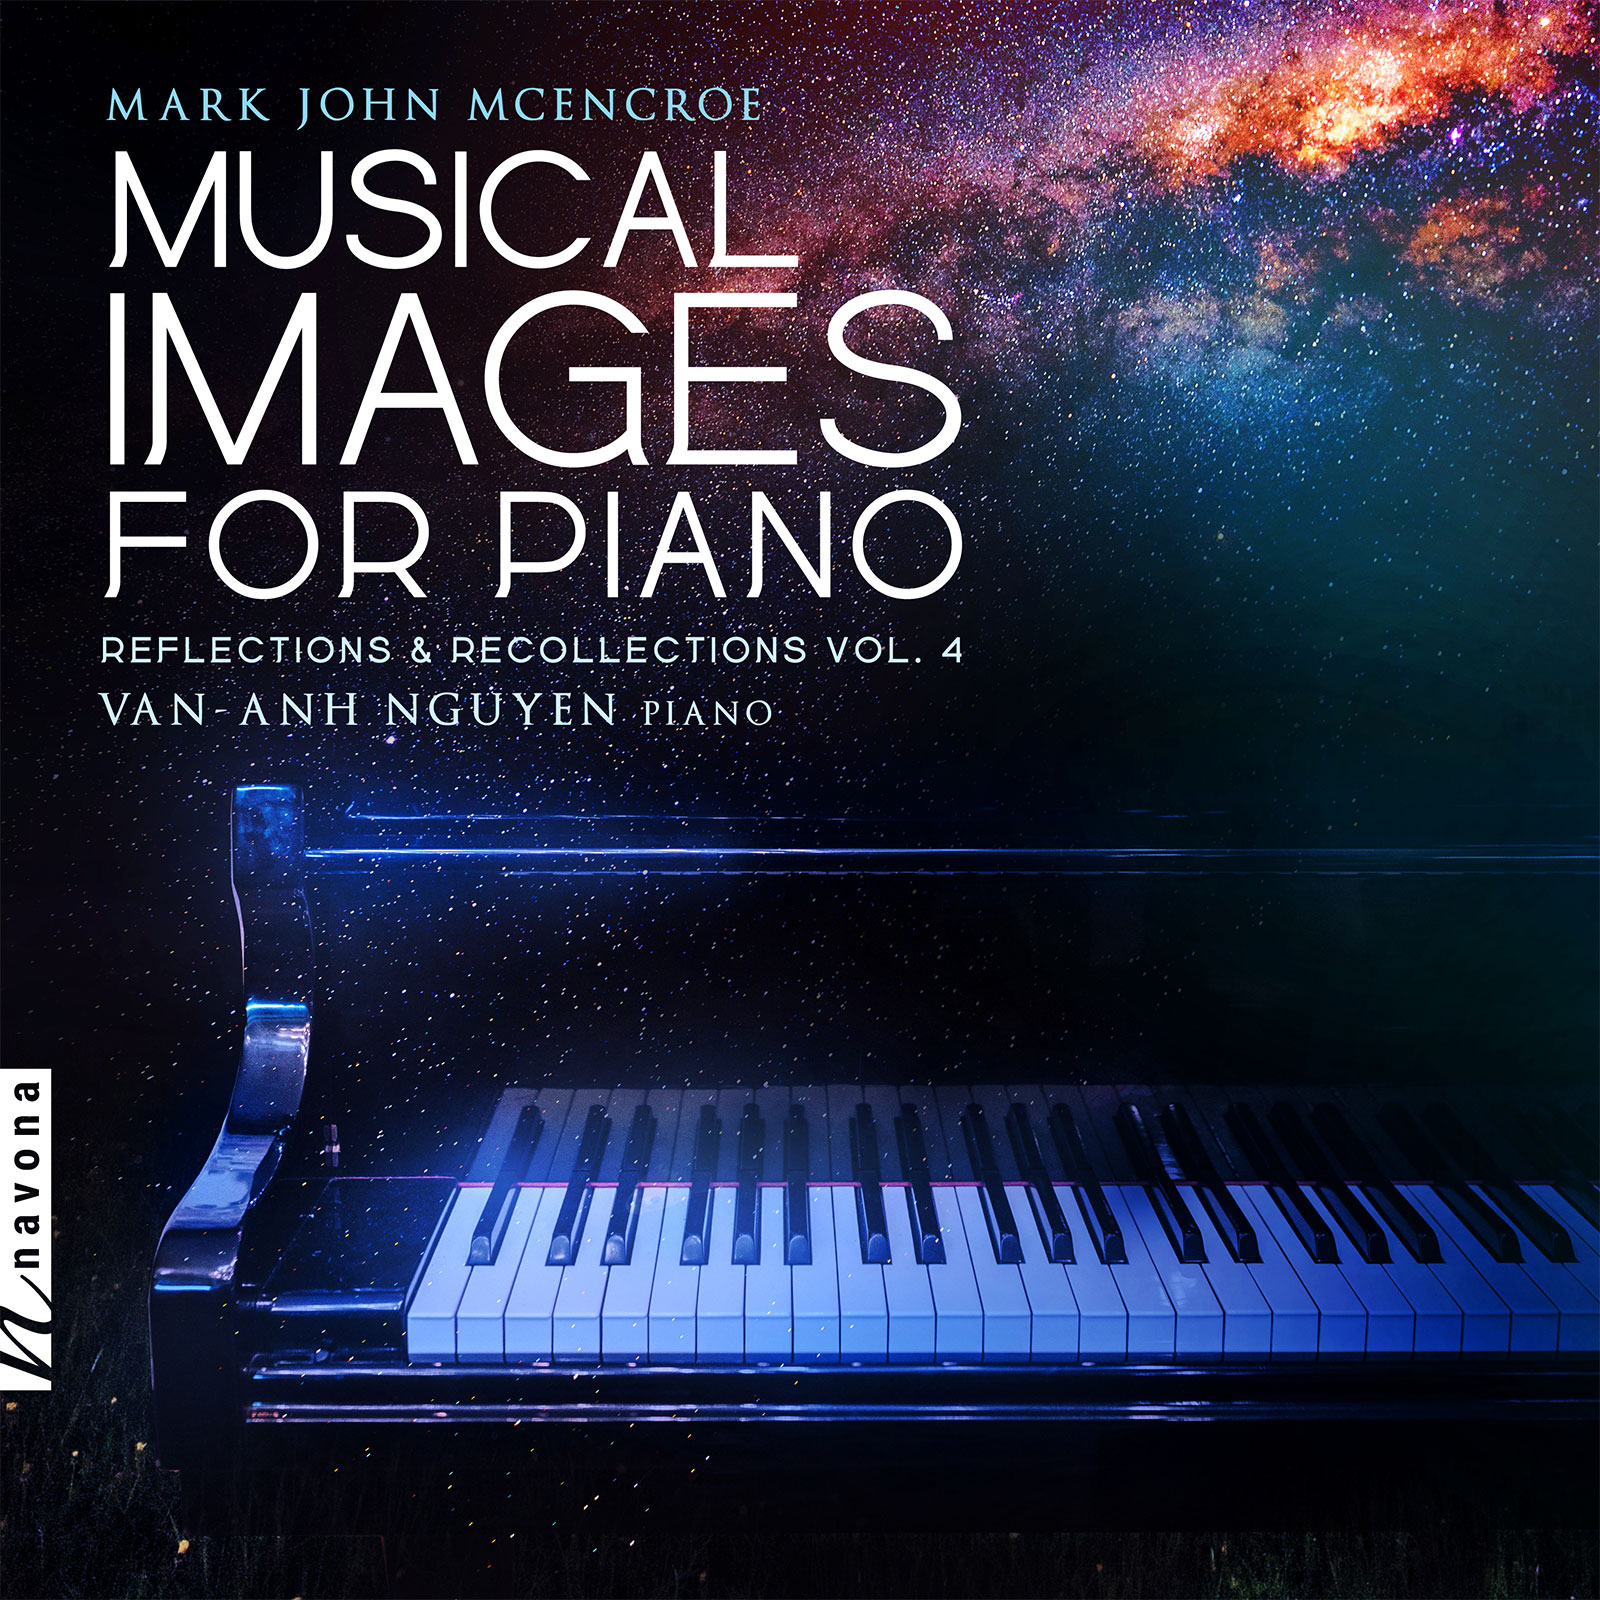 Musical Images for Piano: Reflections & Recollections Vol. 4